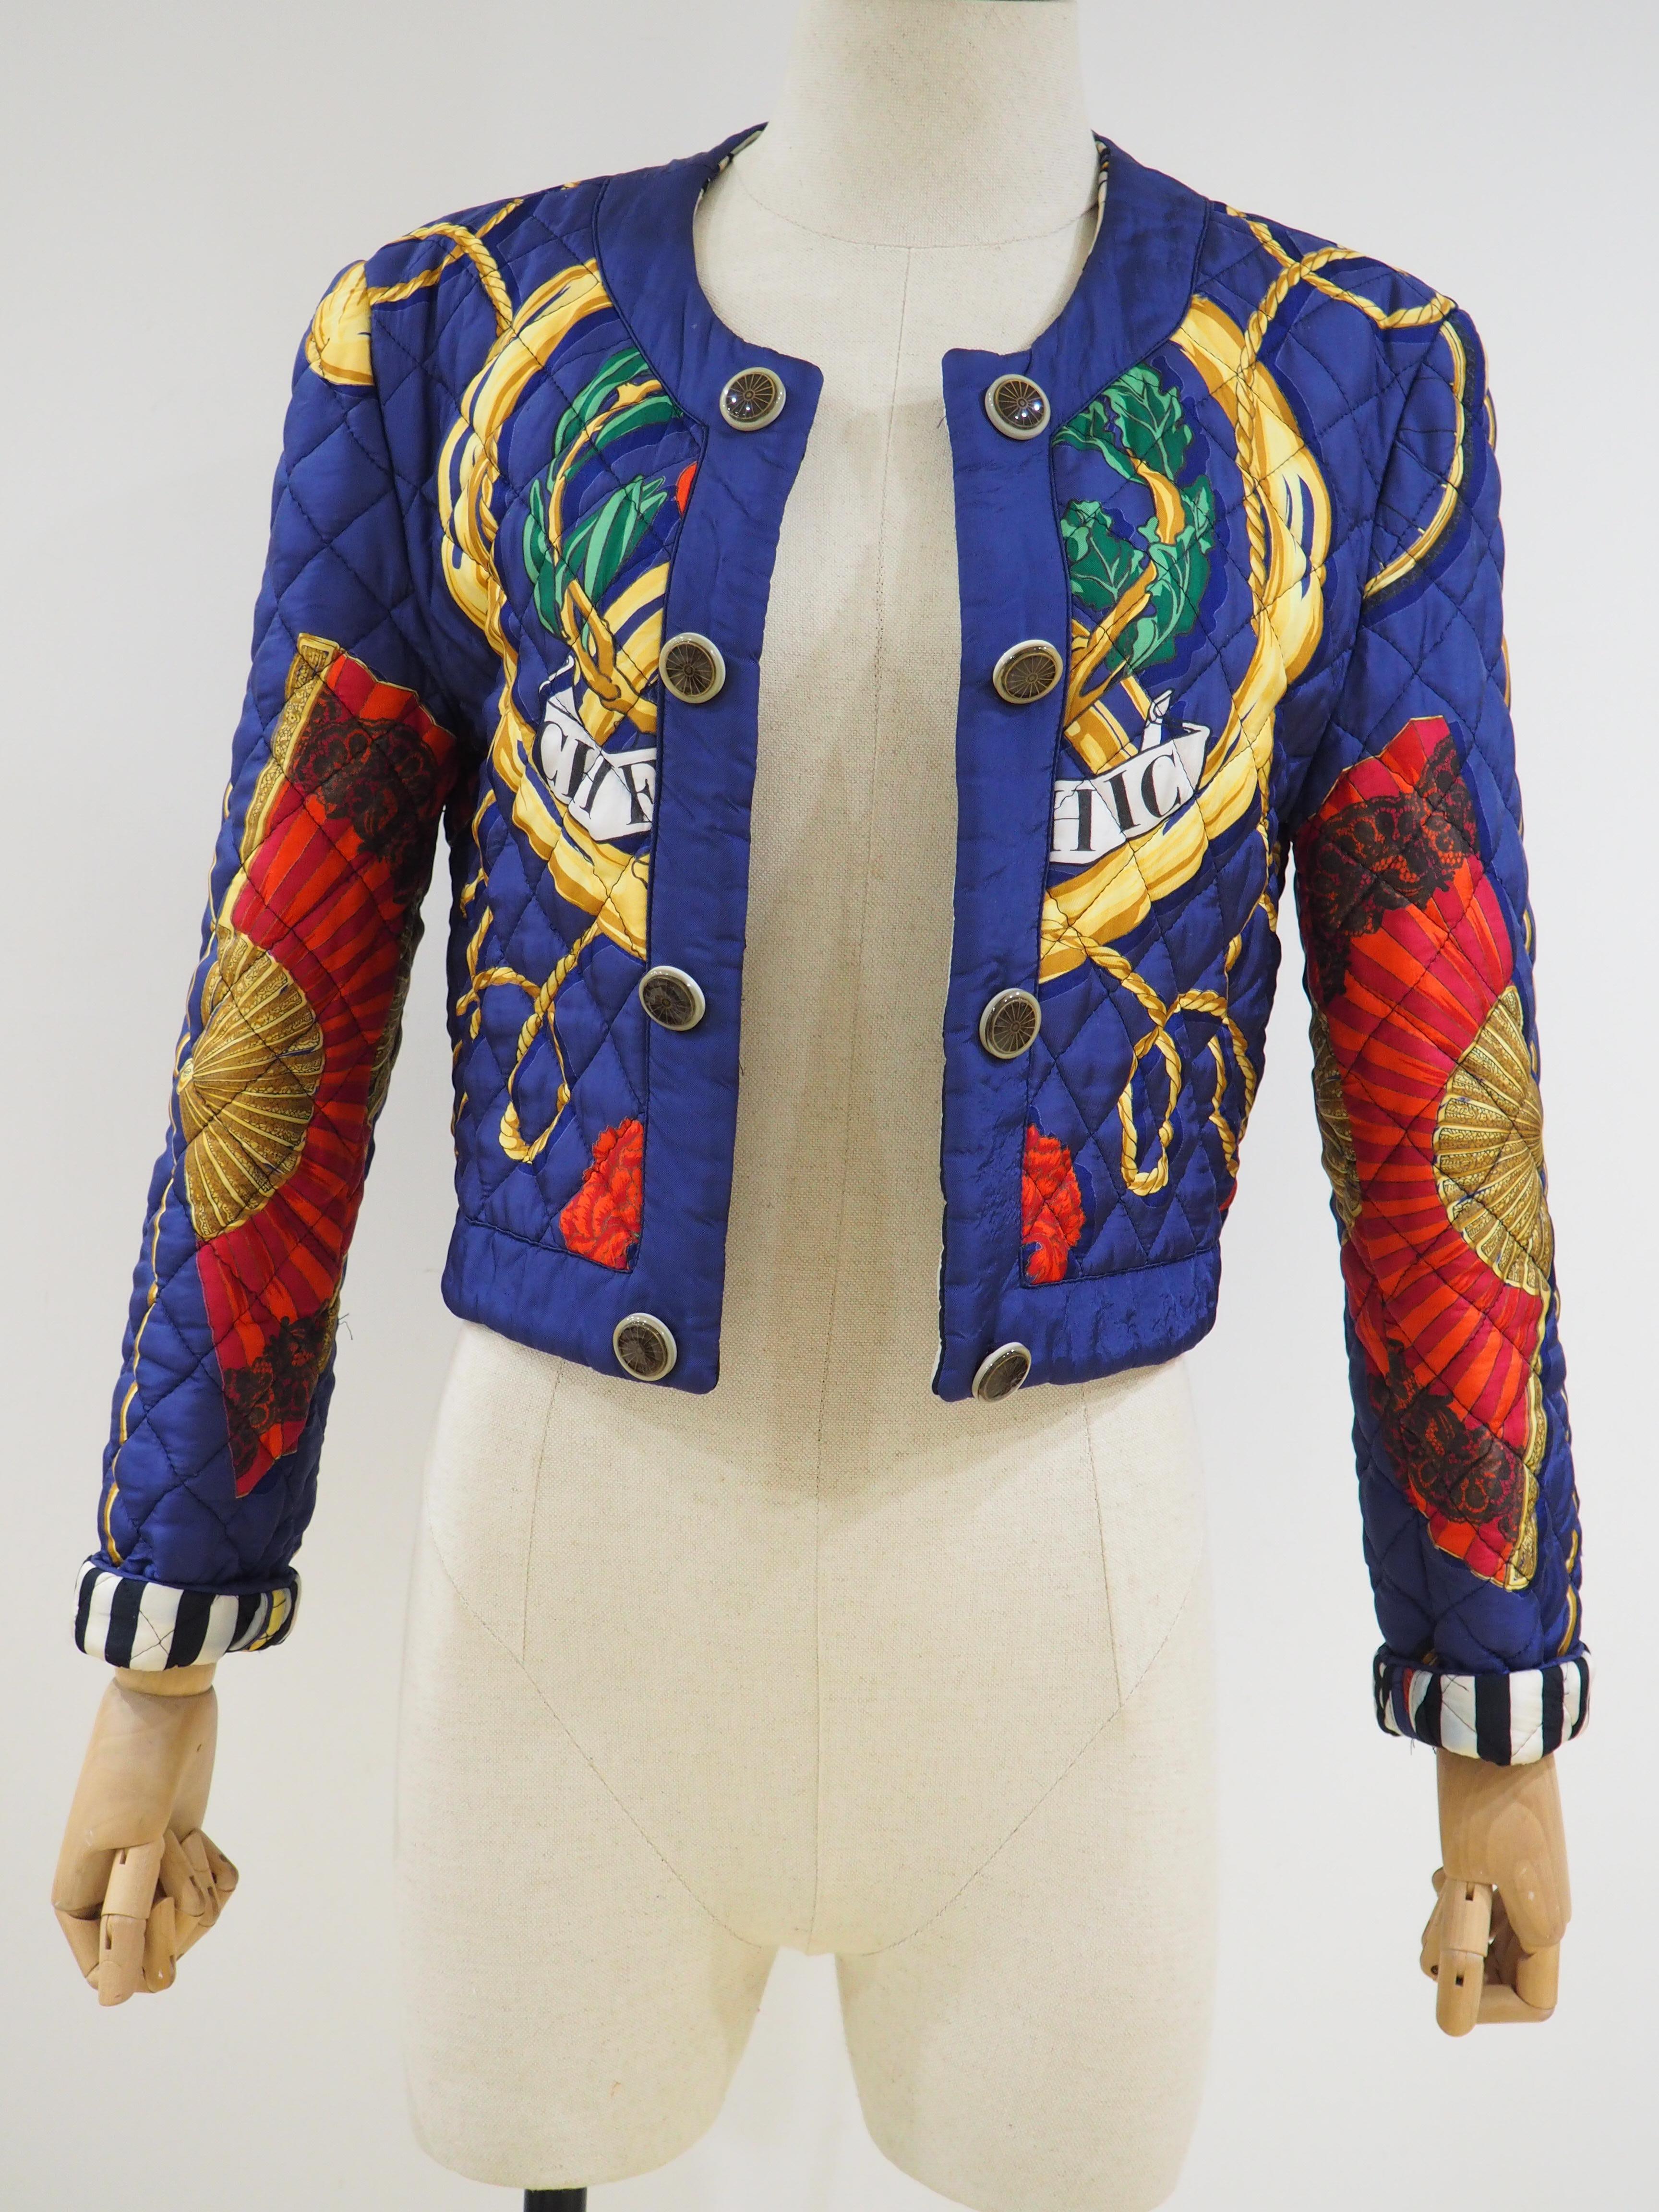 Moschino Cheap & Chic blue multicoloured jacket
totally made in italy in size 44
composition: Rayon